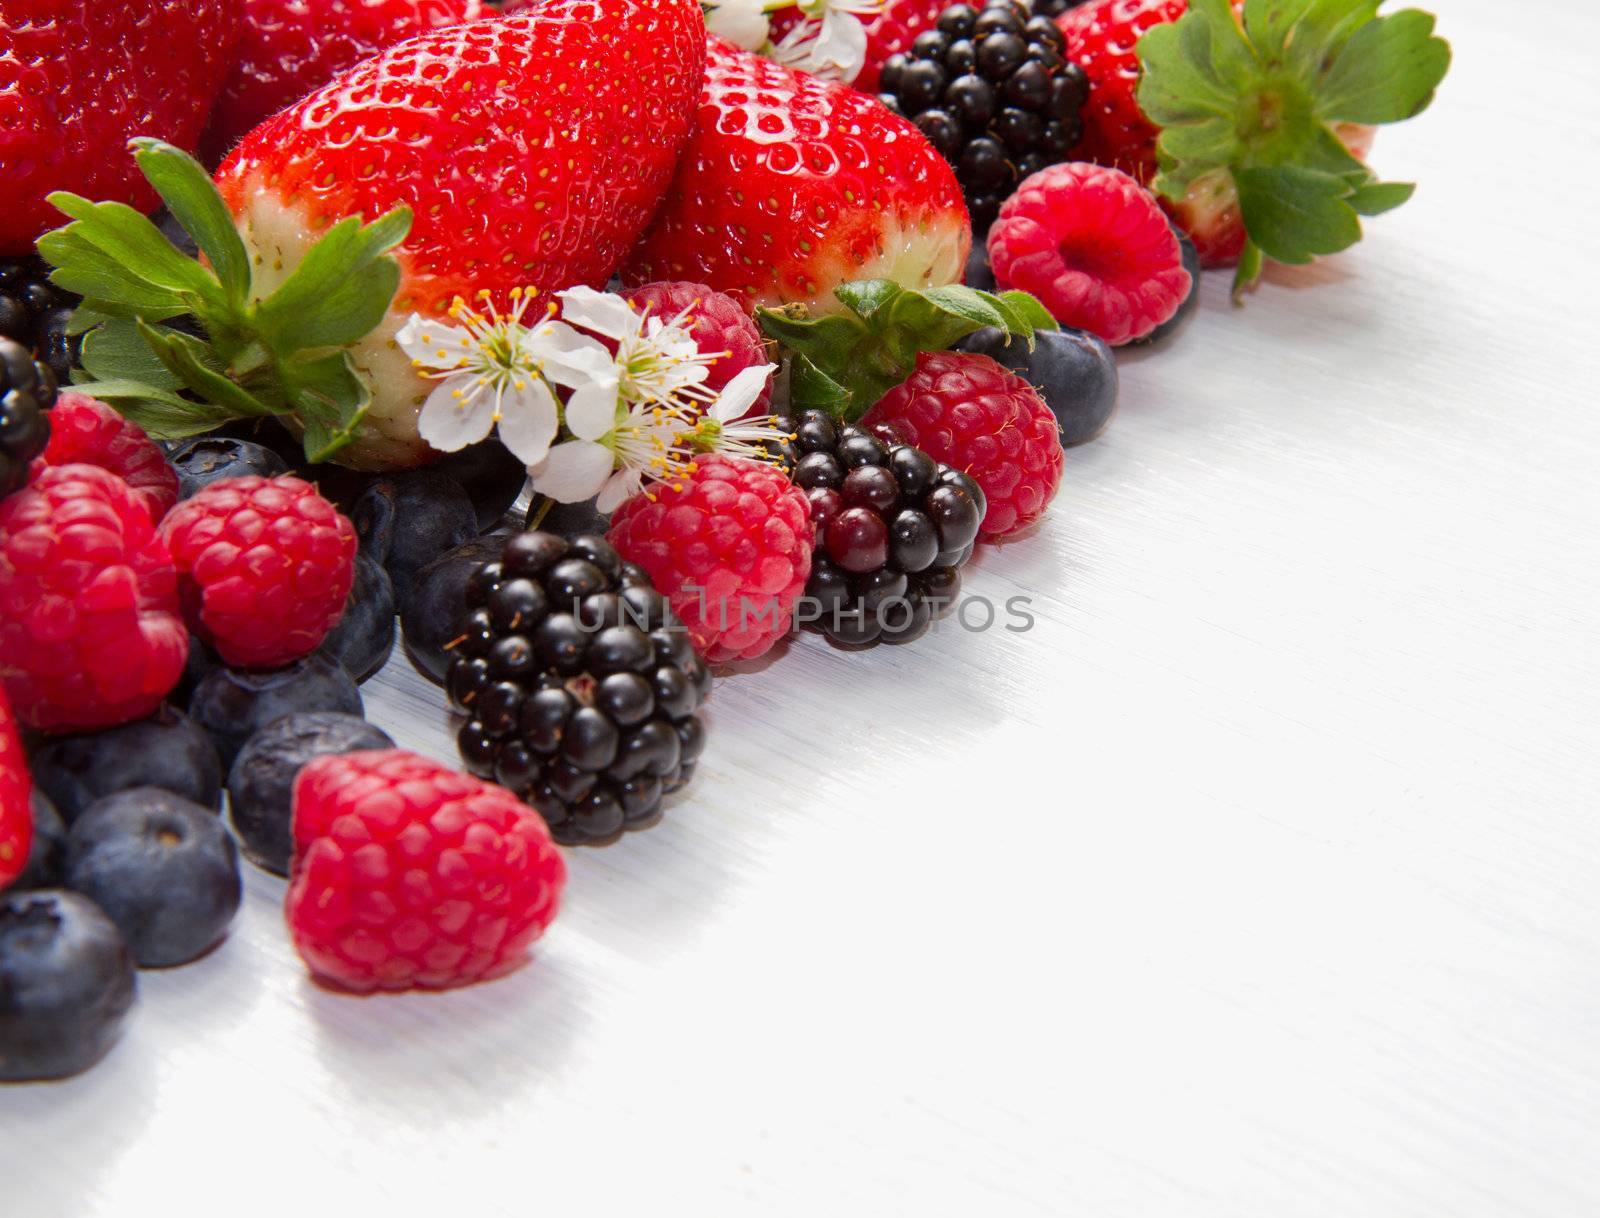 Berries on white Wooden Background by lsantilli